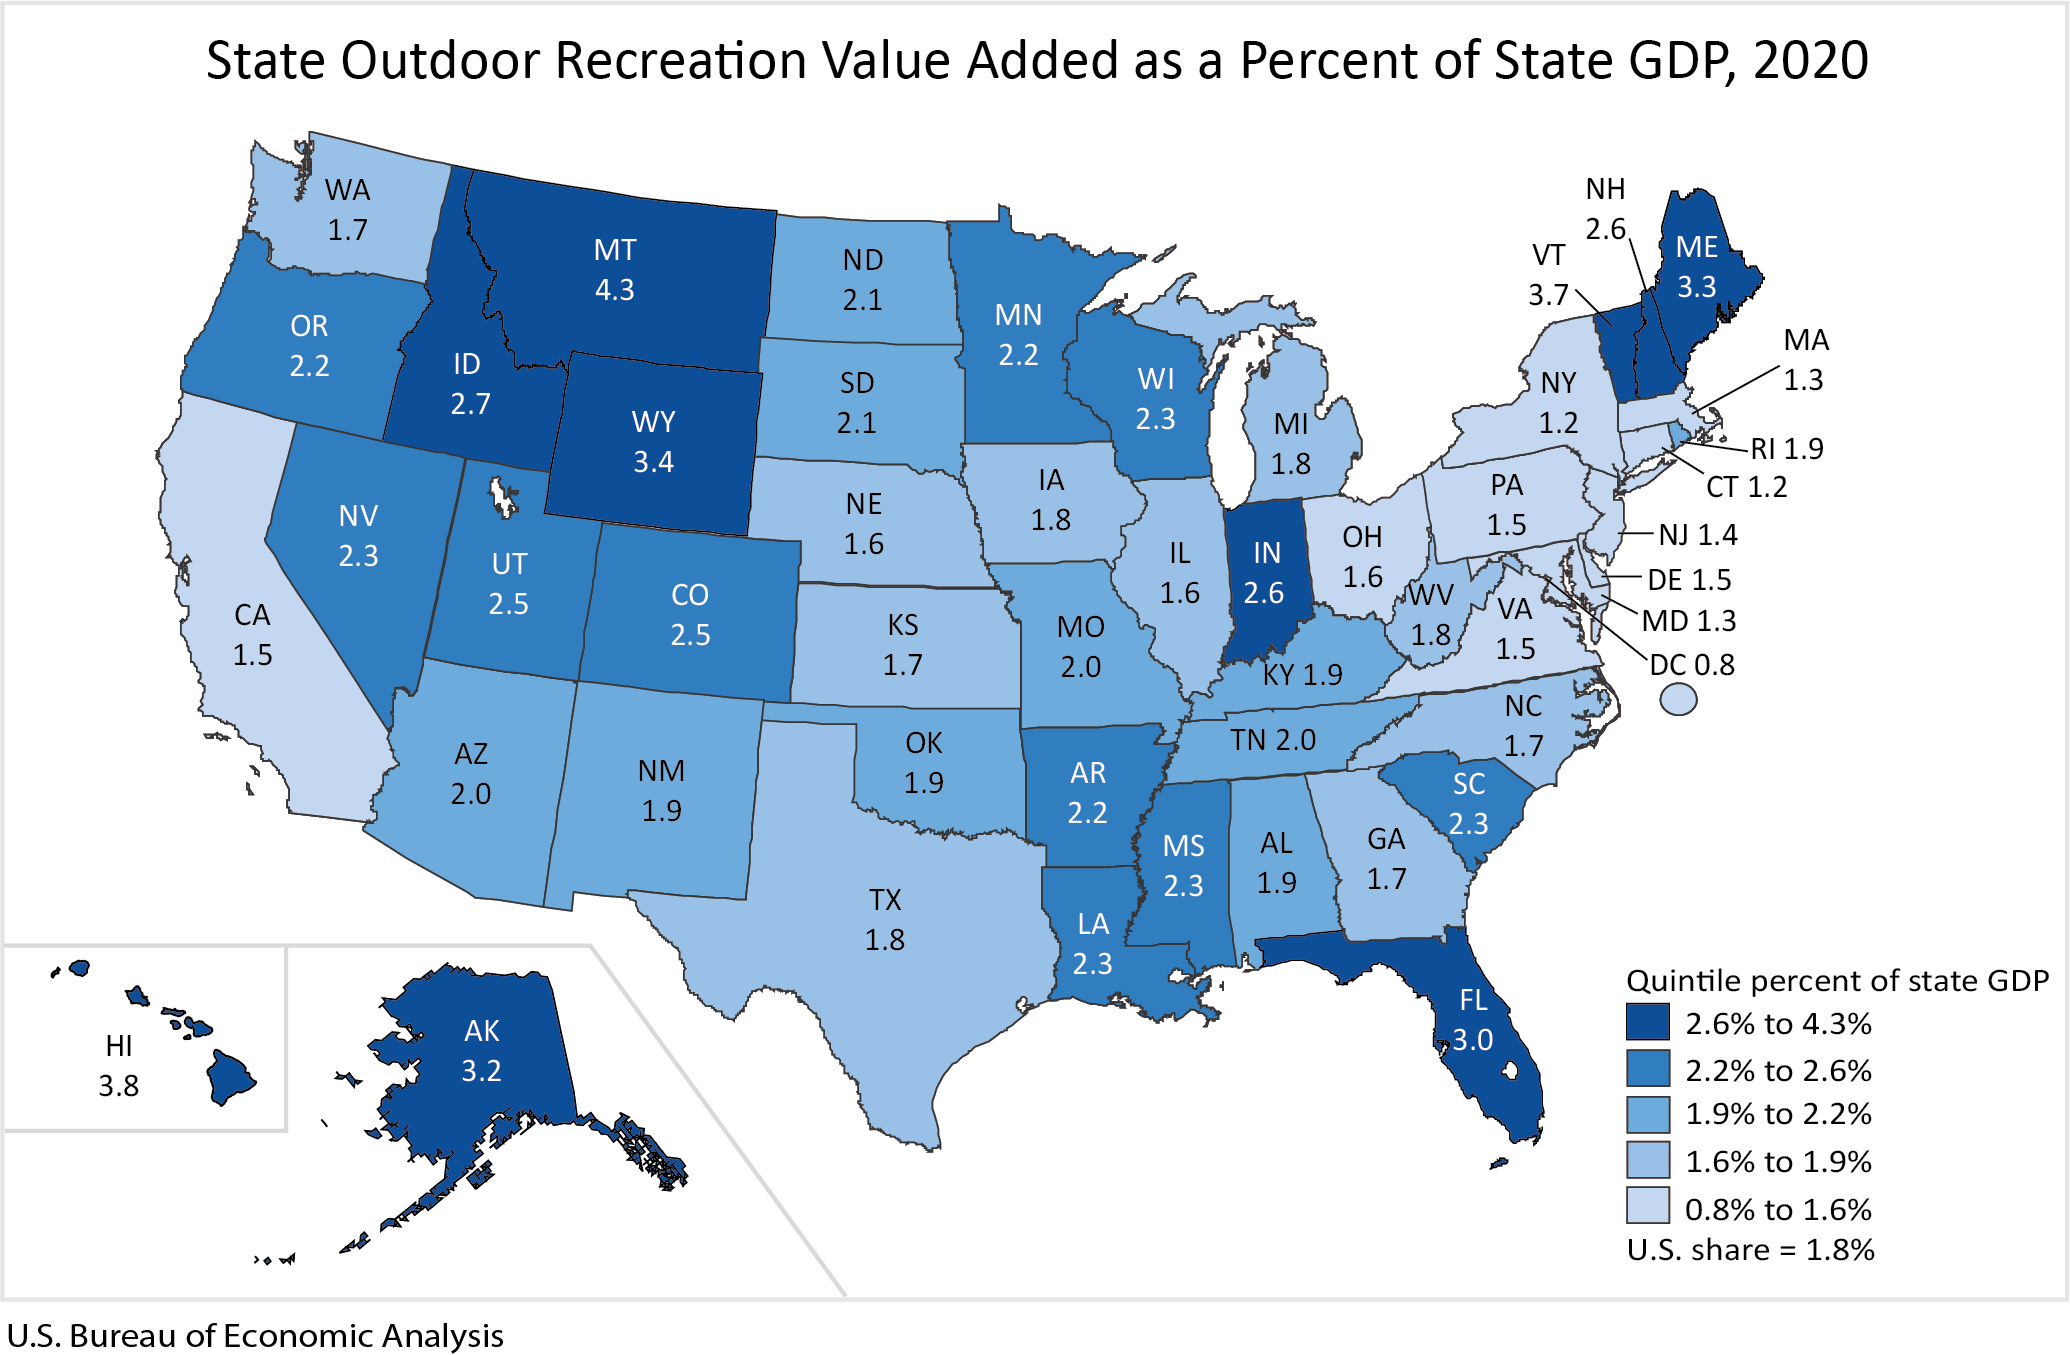 State Outdoor Recreation Value Added as a Percent of State GDP, 2020